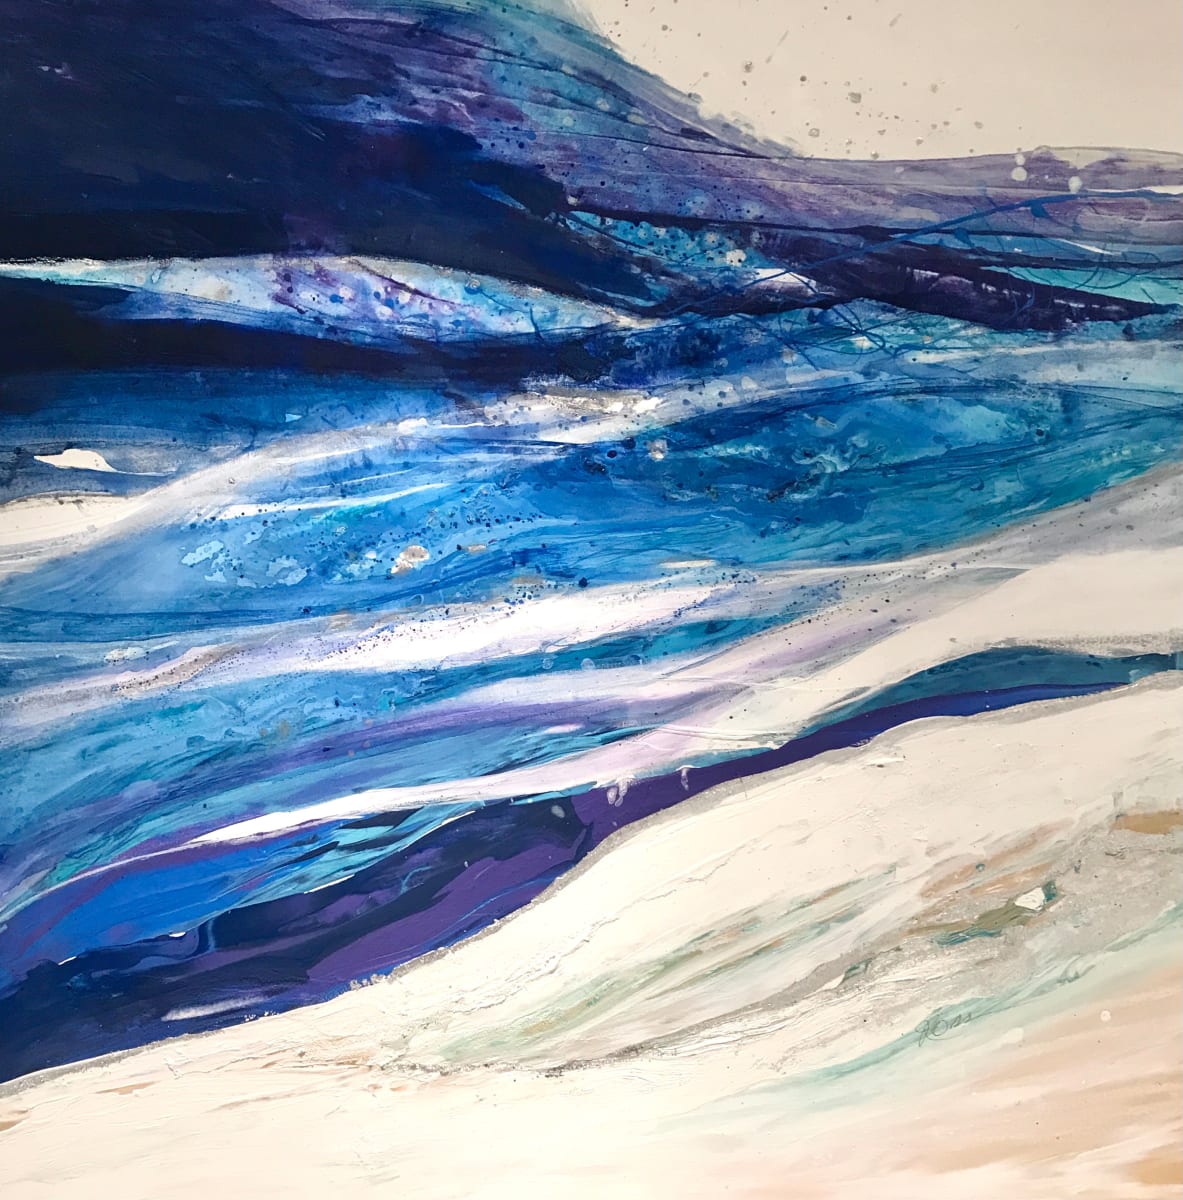 Breaker by Julia Ross  Image: The push of the waves. The whitecaps bubbling and fizzing as they disappear into the sand. Treasures of the ocean tease the shore as they are pulled back and forth by the tides. This dynamic piece encapsulates the magic of the shoreline in vivid hues of blue interspersed with cool whites and sand tones.